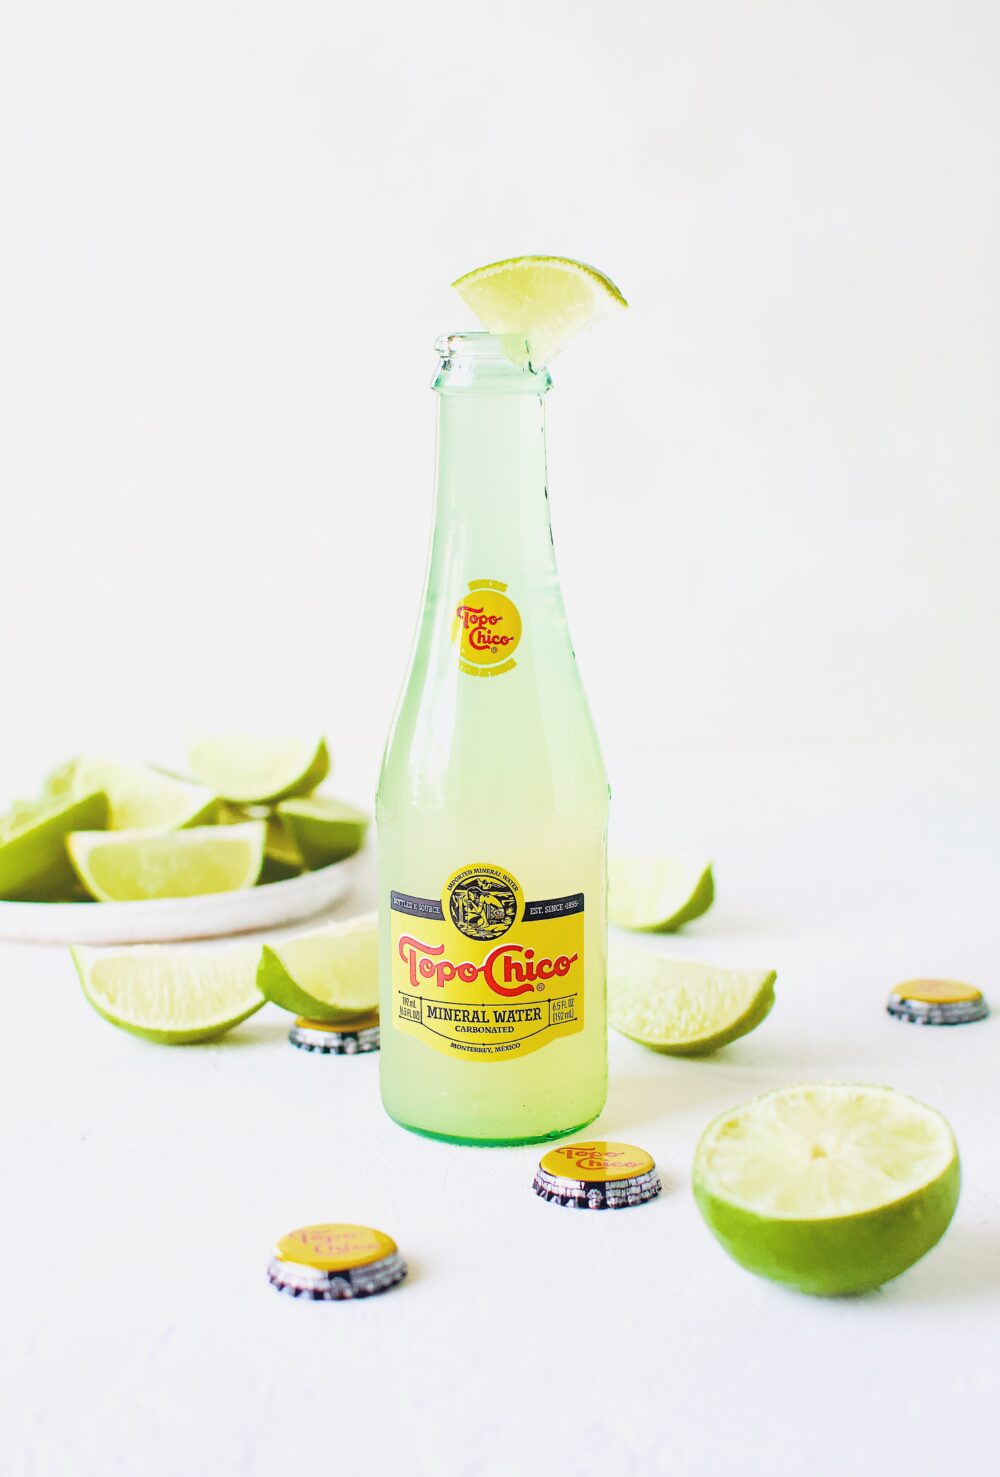 Topo Chico Margarita served in the bottle, surrounded by wedged limes.